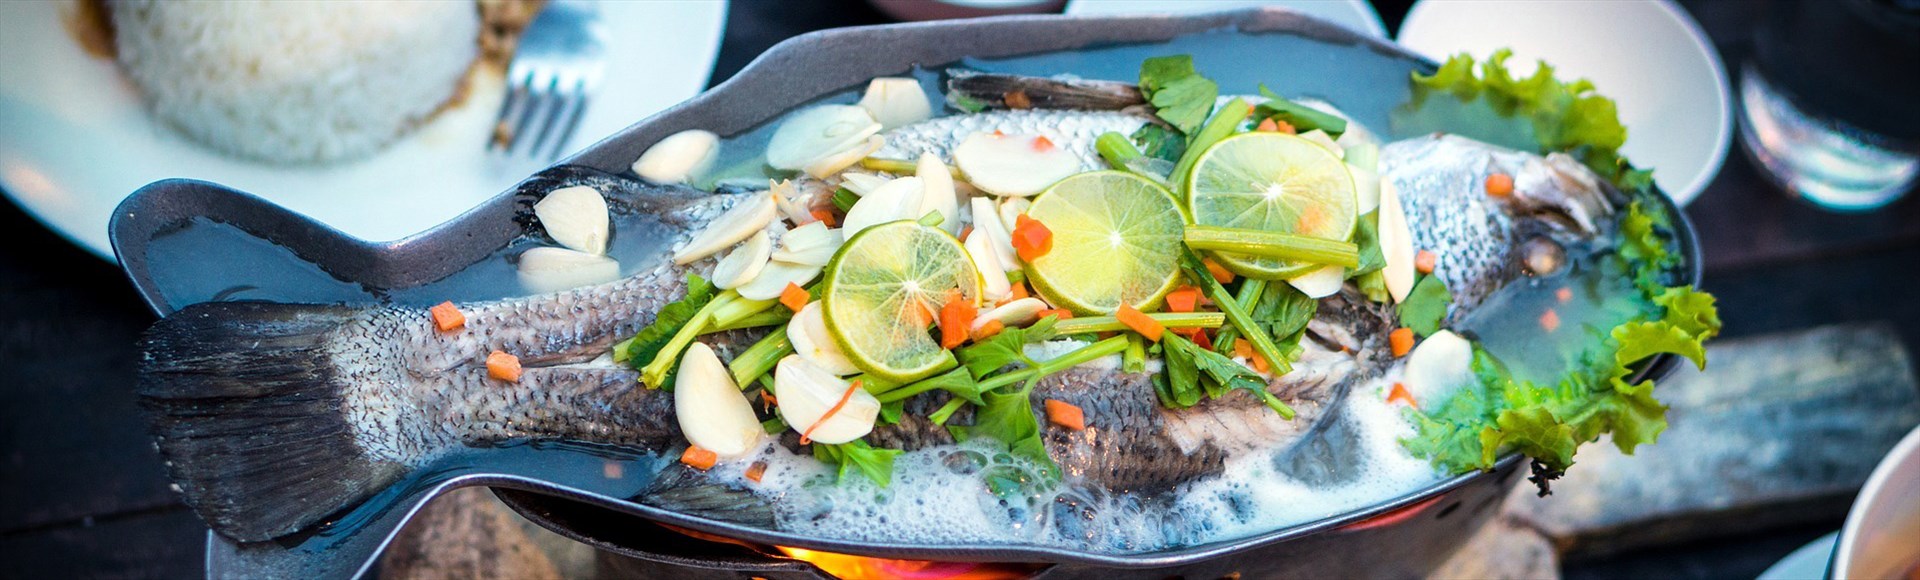 fish-with-lemon-and-vegetables - Alargo Private Chef Service in Crete | Christos & Michael